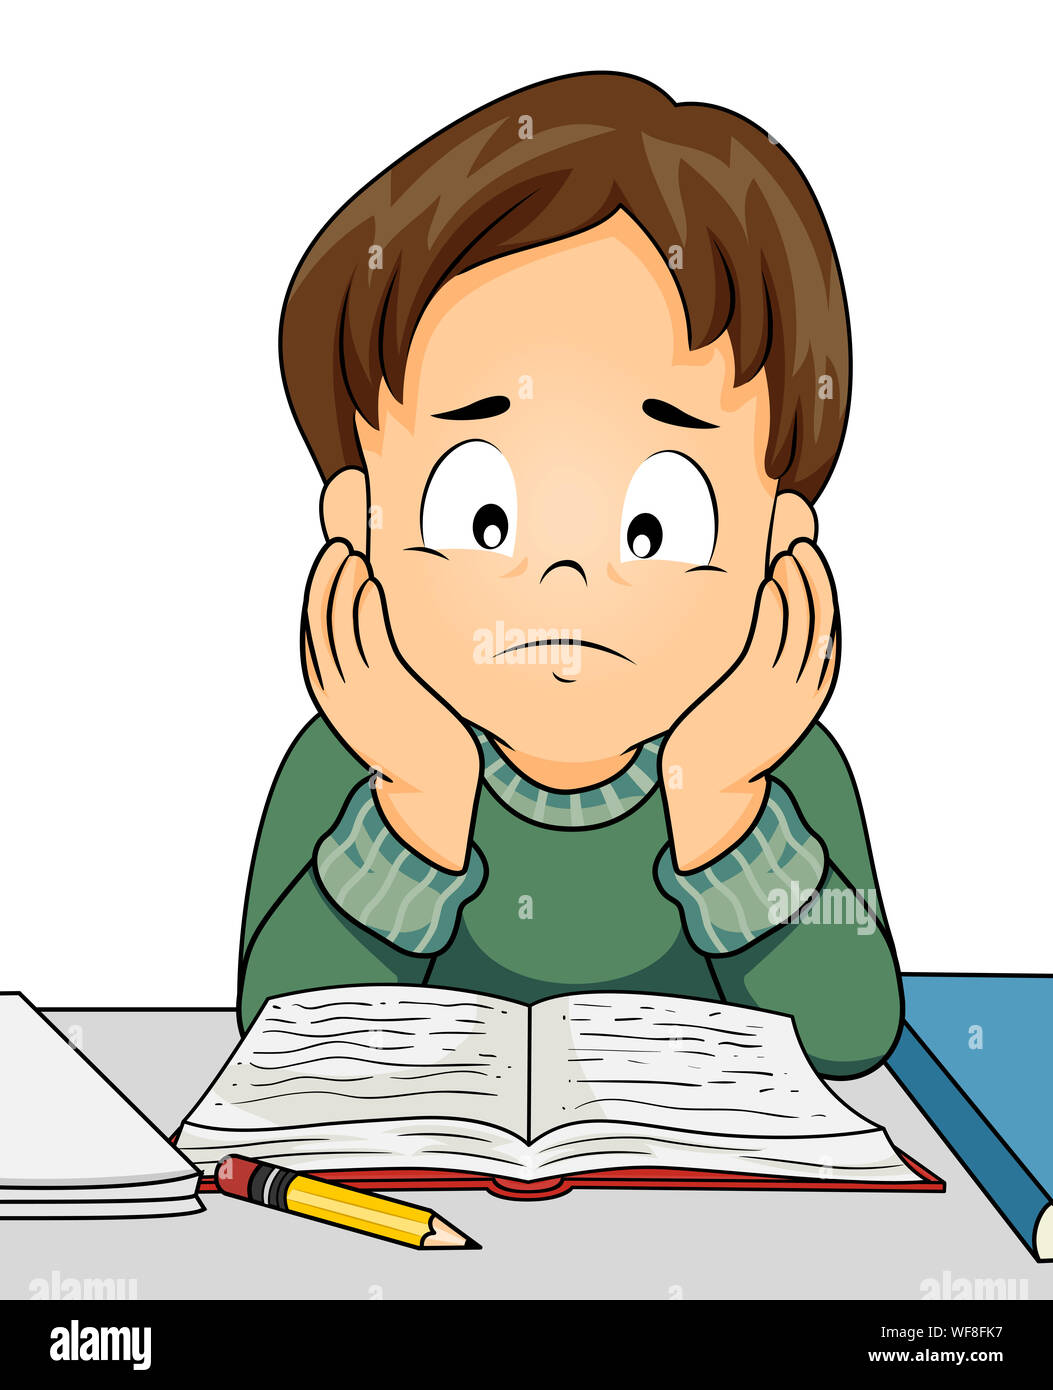 Illustration of a Kid Boy Feeling Stressed and Looking Down at His ...